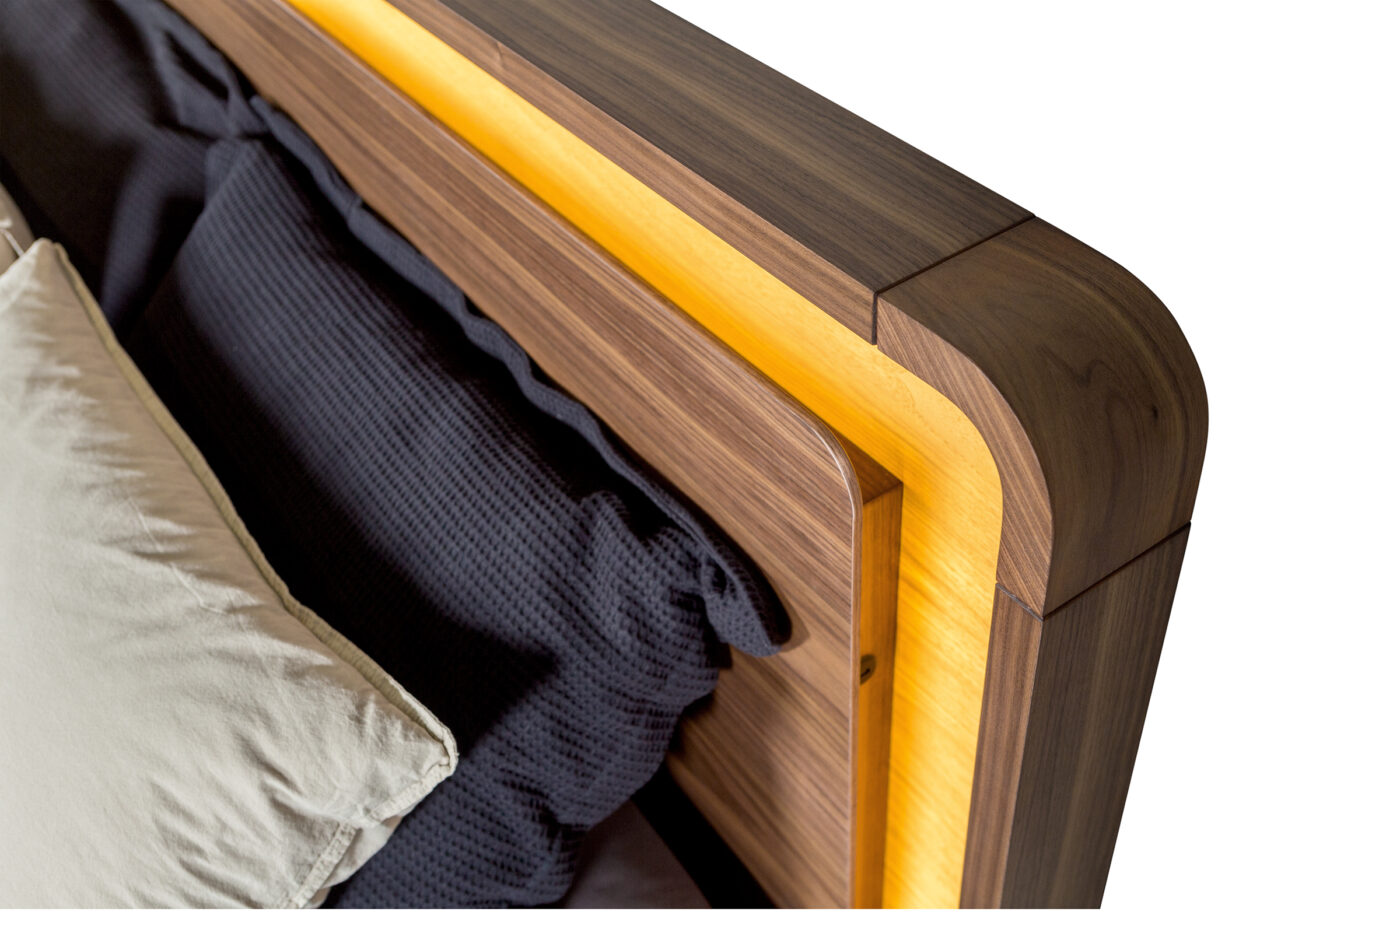 double bed detail 2